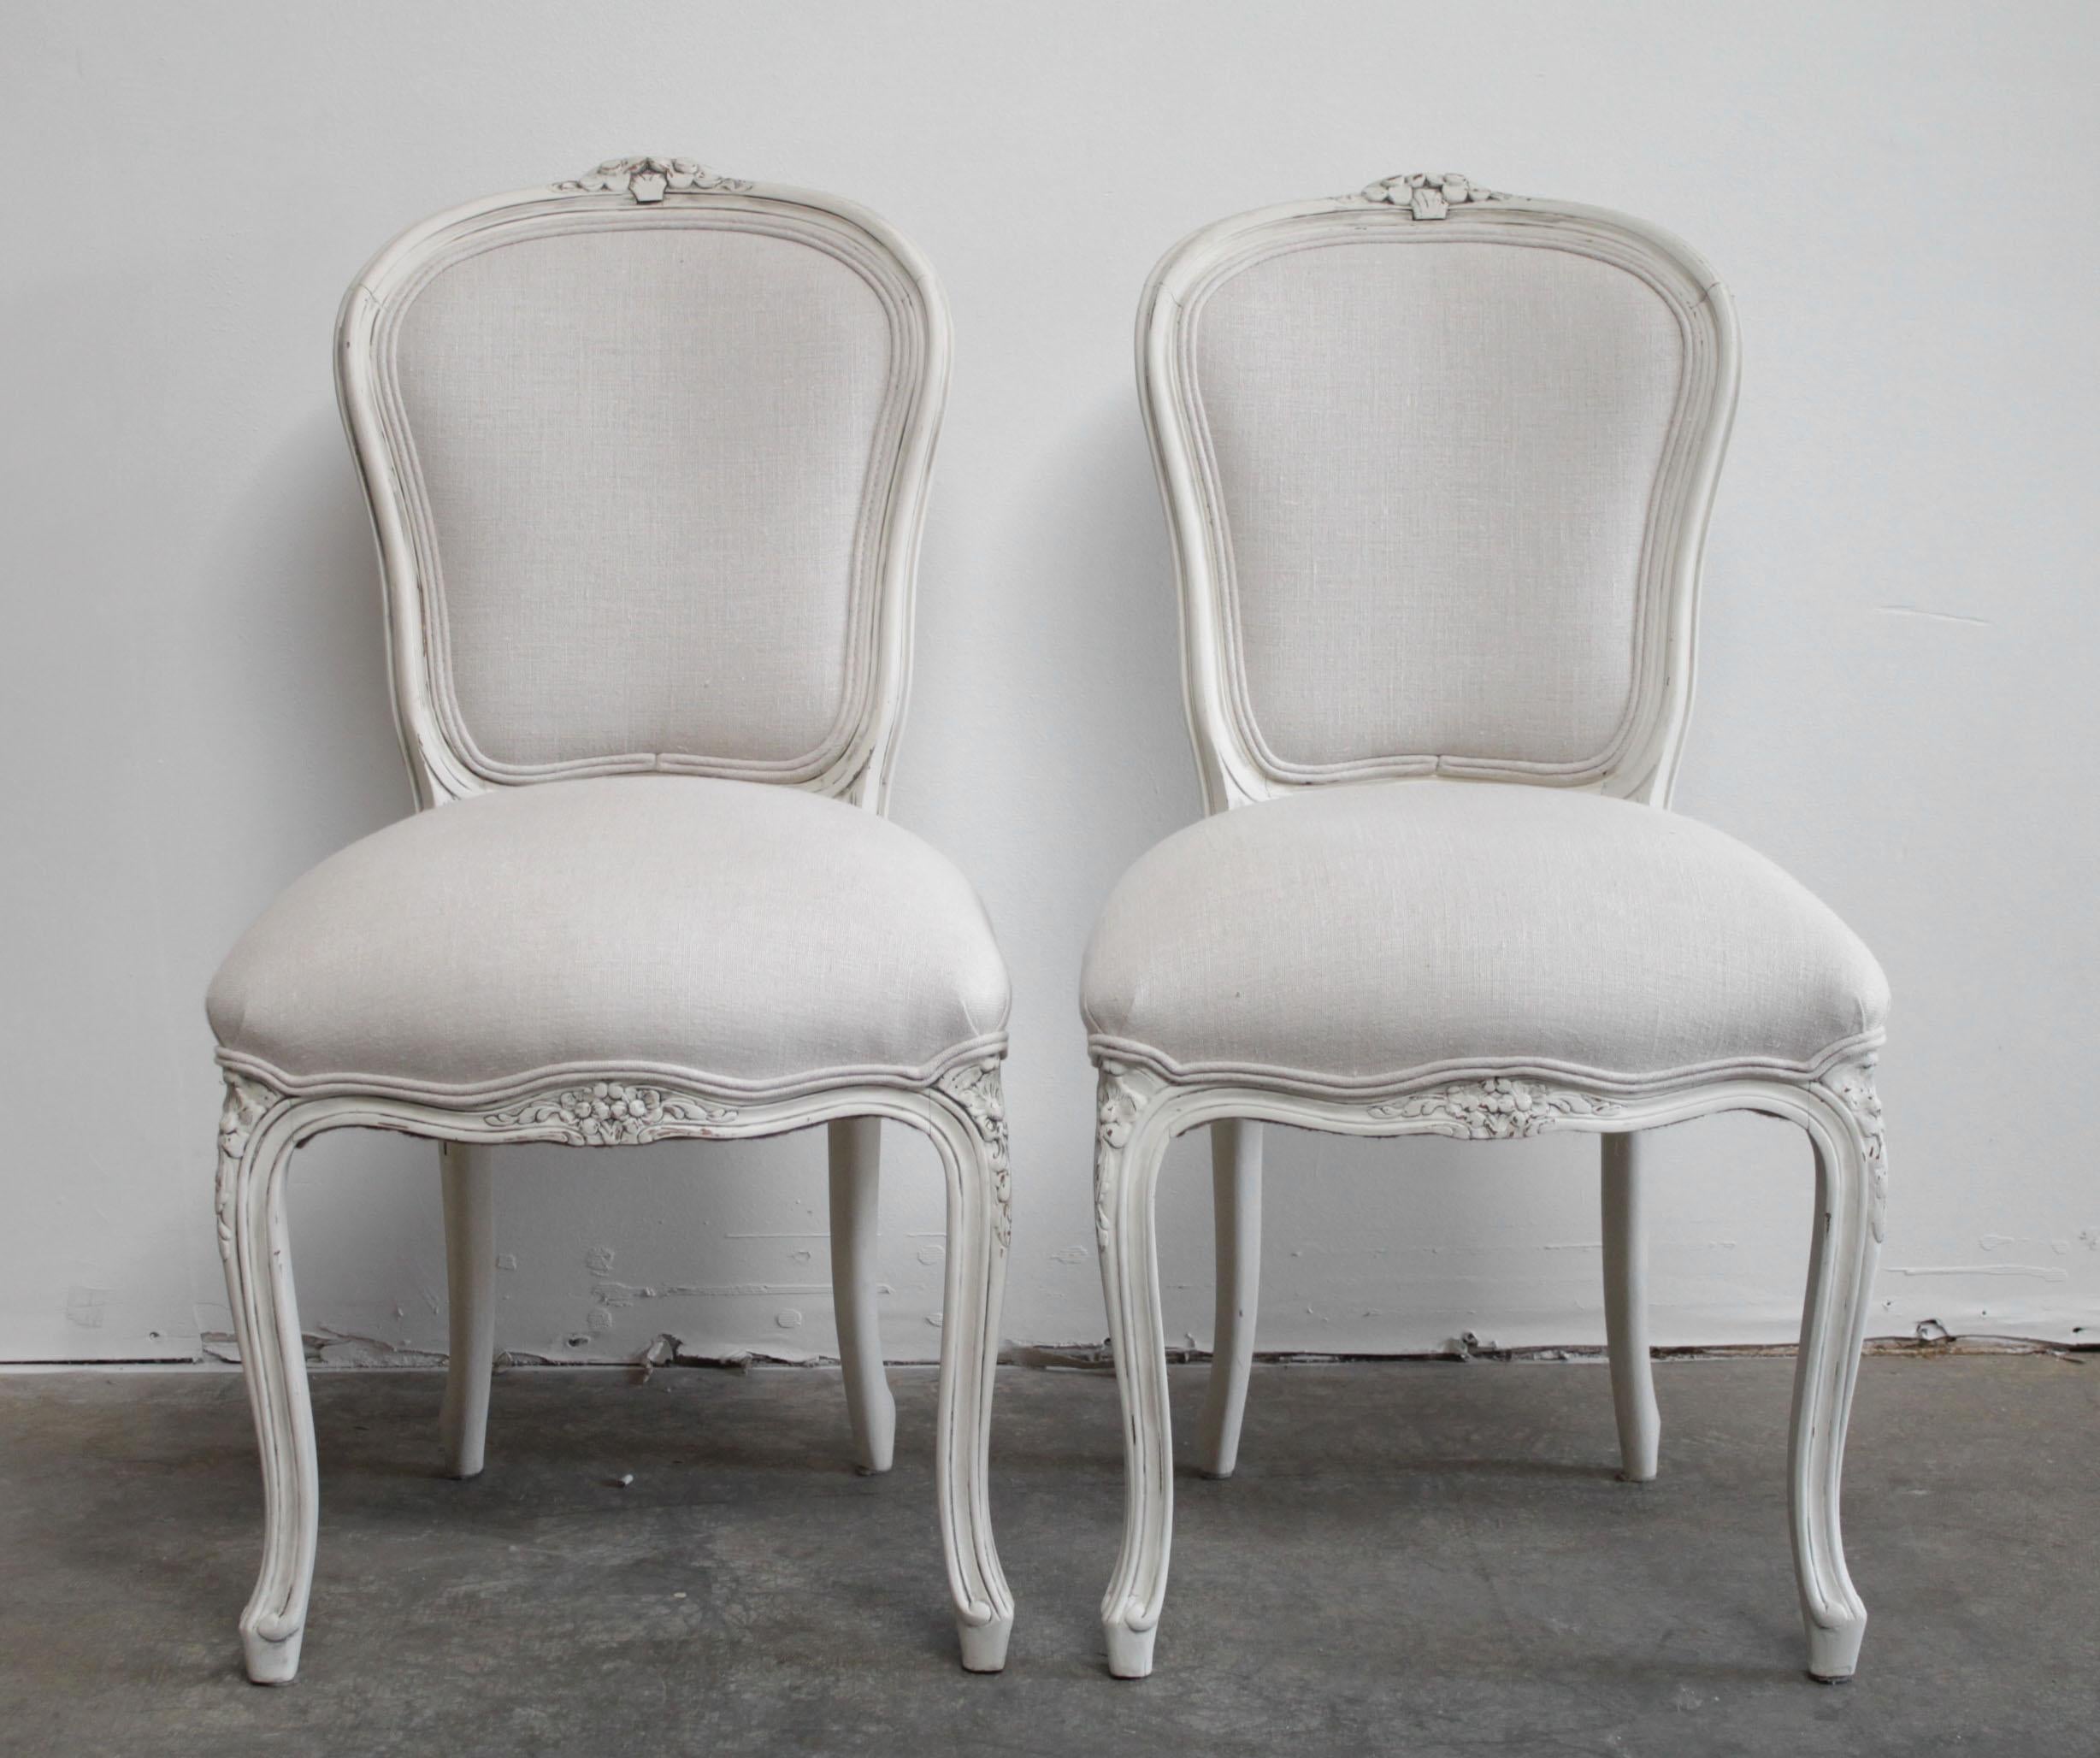 Pair of vintage painted and Upholstered French side chairs in the Louis XV style.
Painted in a soft oyster antique white, with subtle distressed edges, and reupholstered in a 100% pure organic natural Belgian linen. These are perfect dining or desk